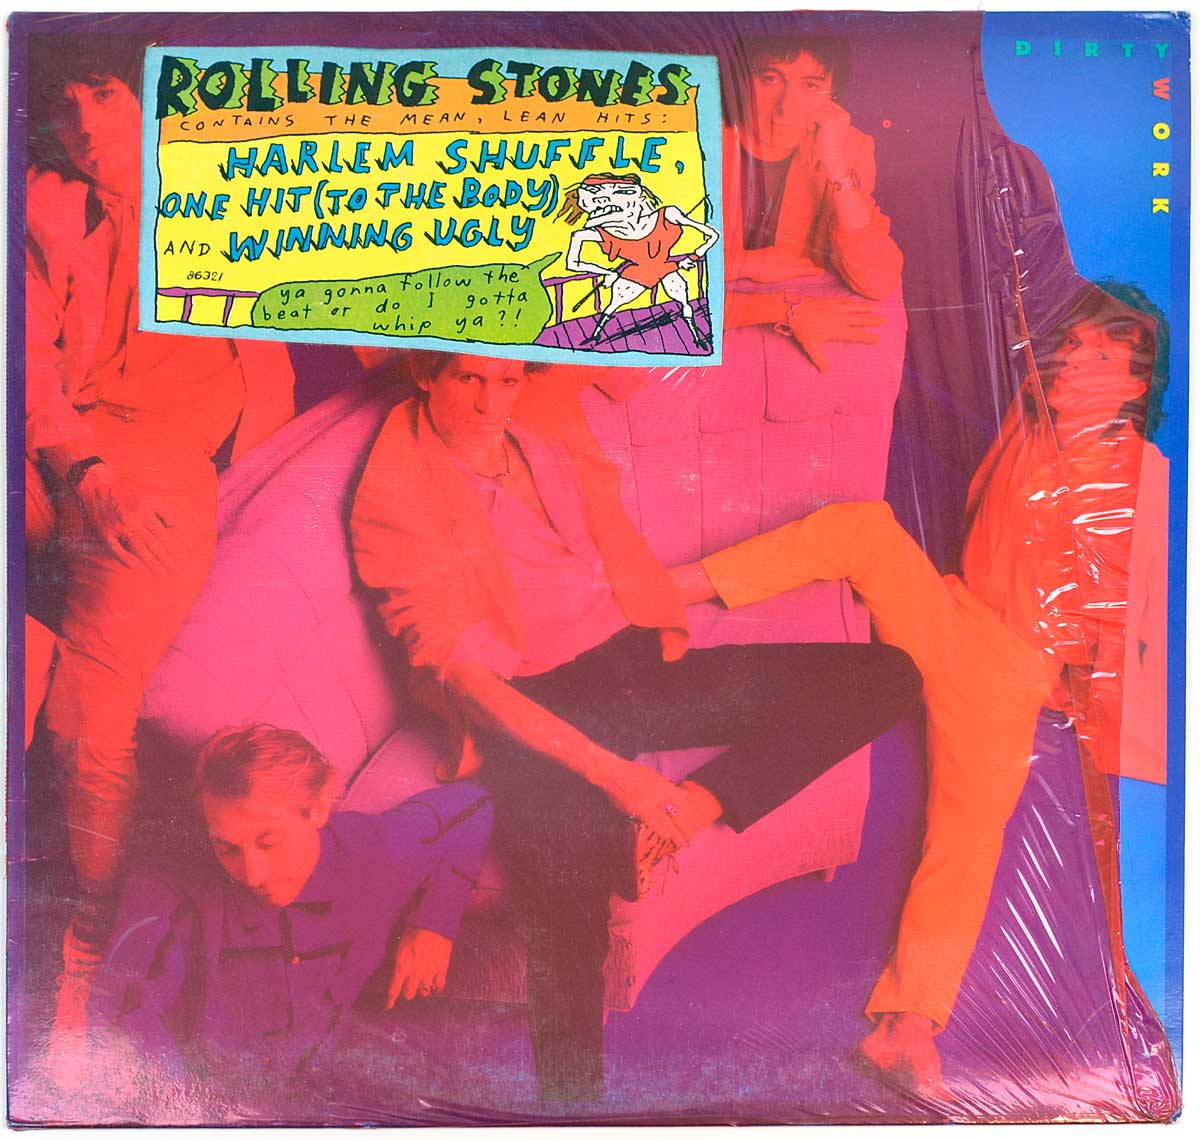 Album Front Cover  Photo of "ROLLING STONES Dirty Work"